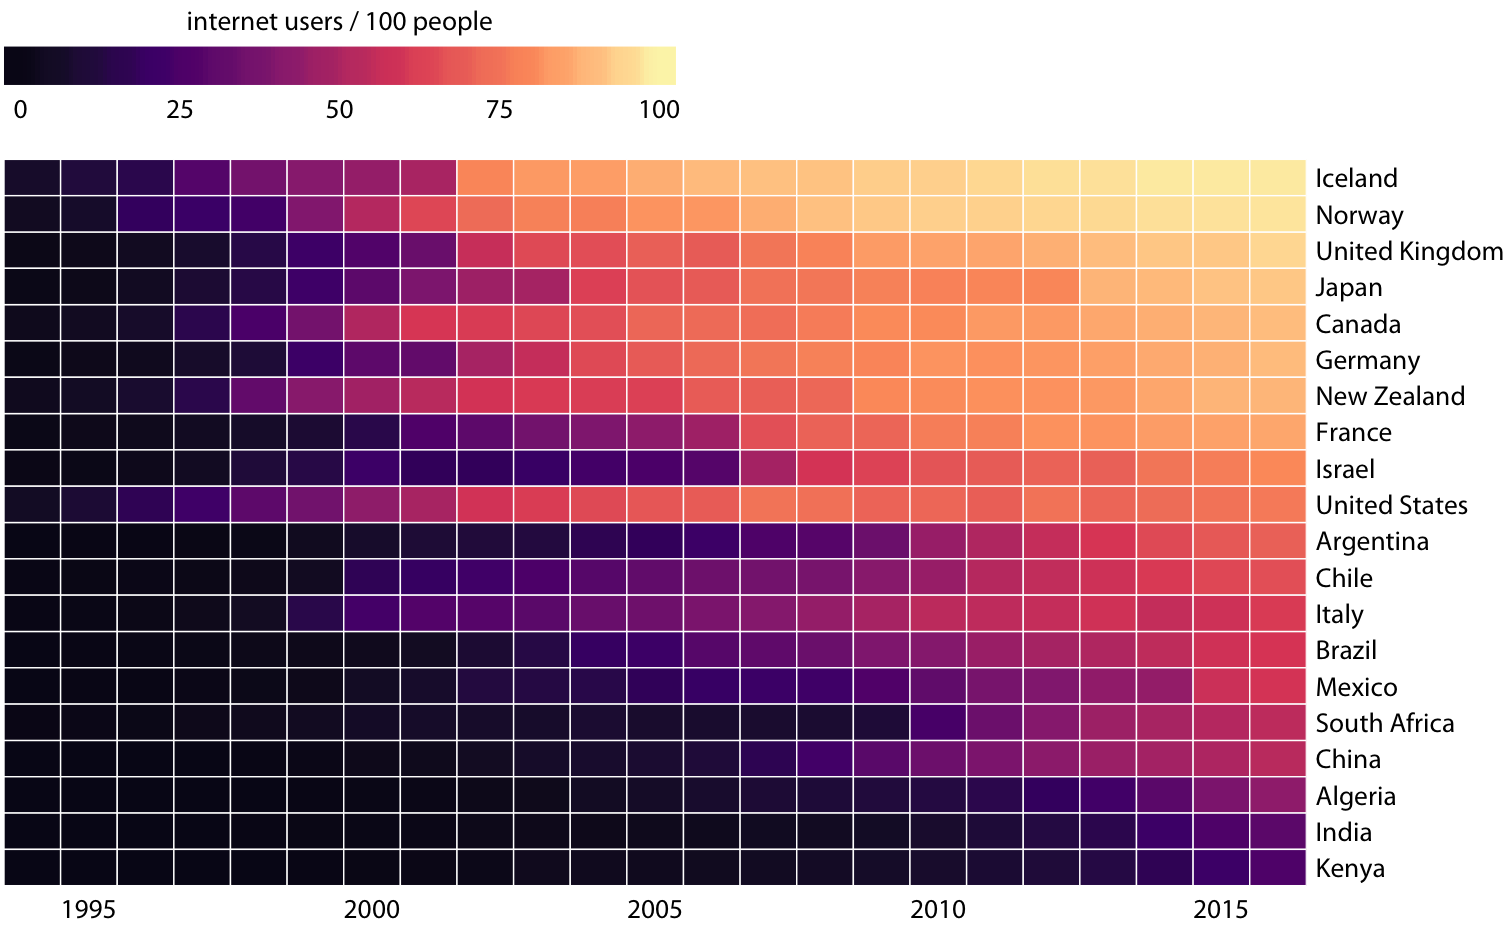 Internet adoption over time, for select countries. Color represents the percent of internet users for the respective country and year. Countries were ordered by percent internet users in 2016. Data source: World Bank